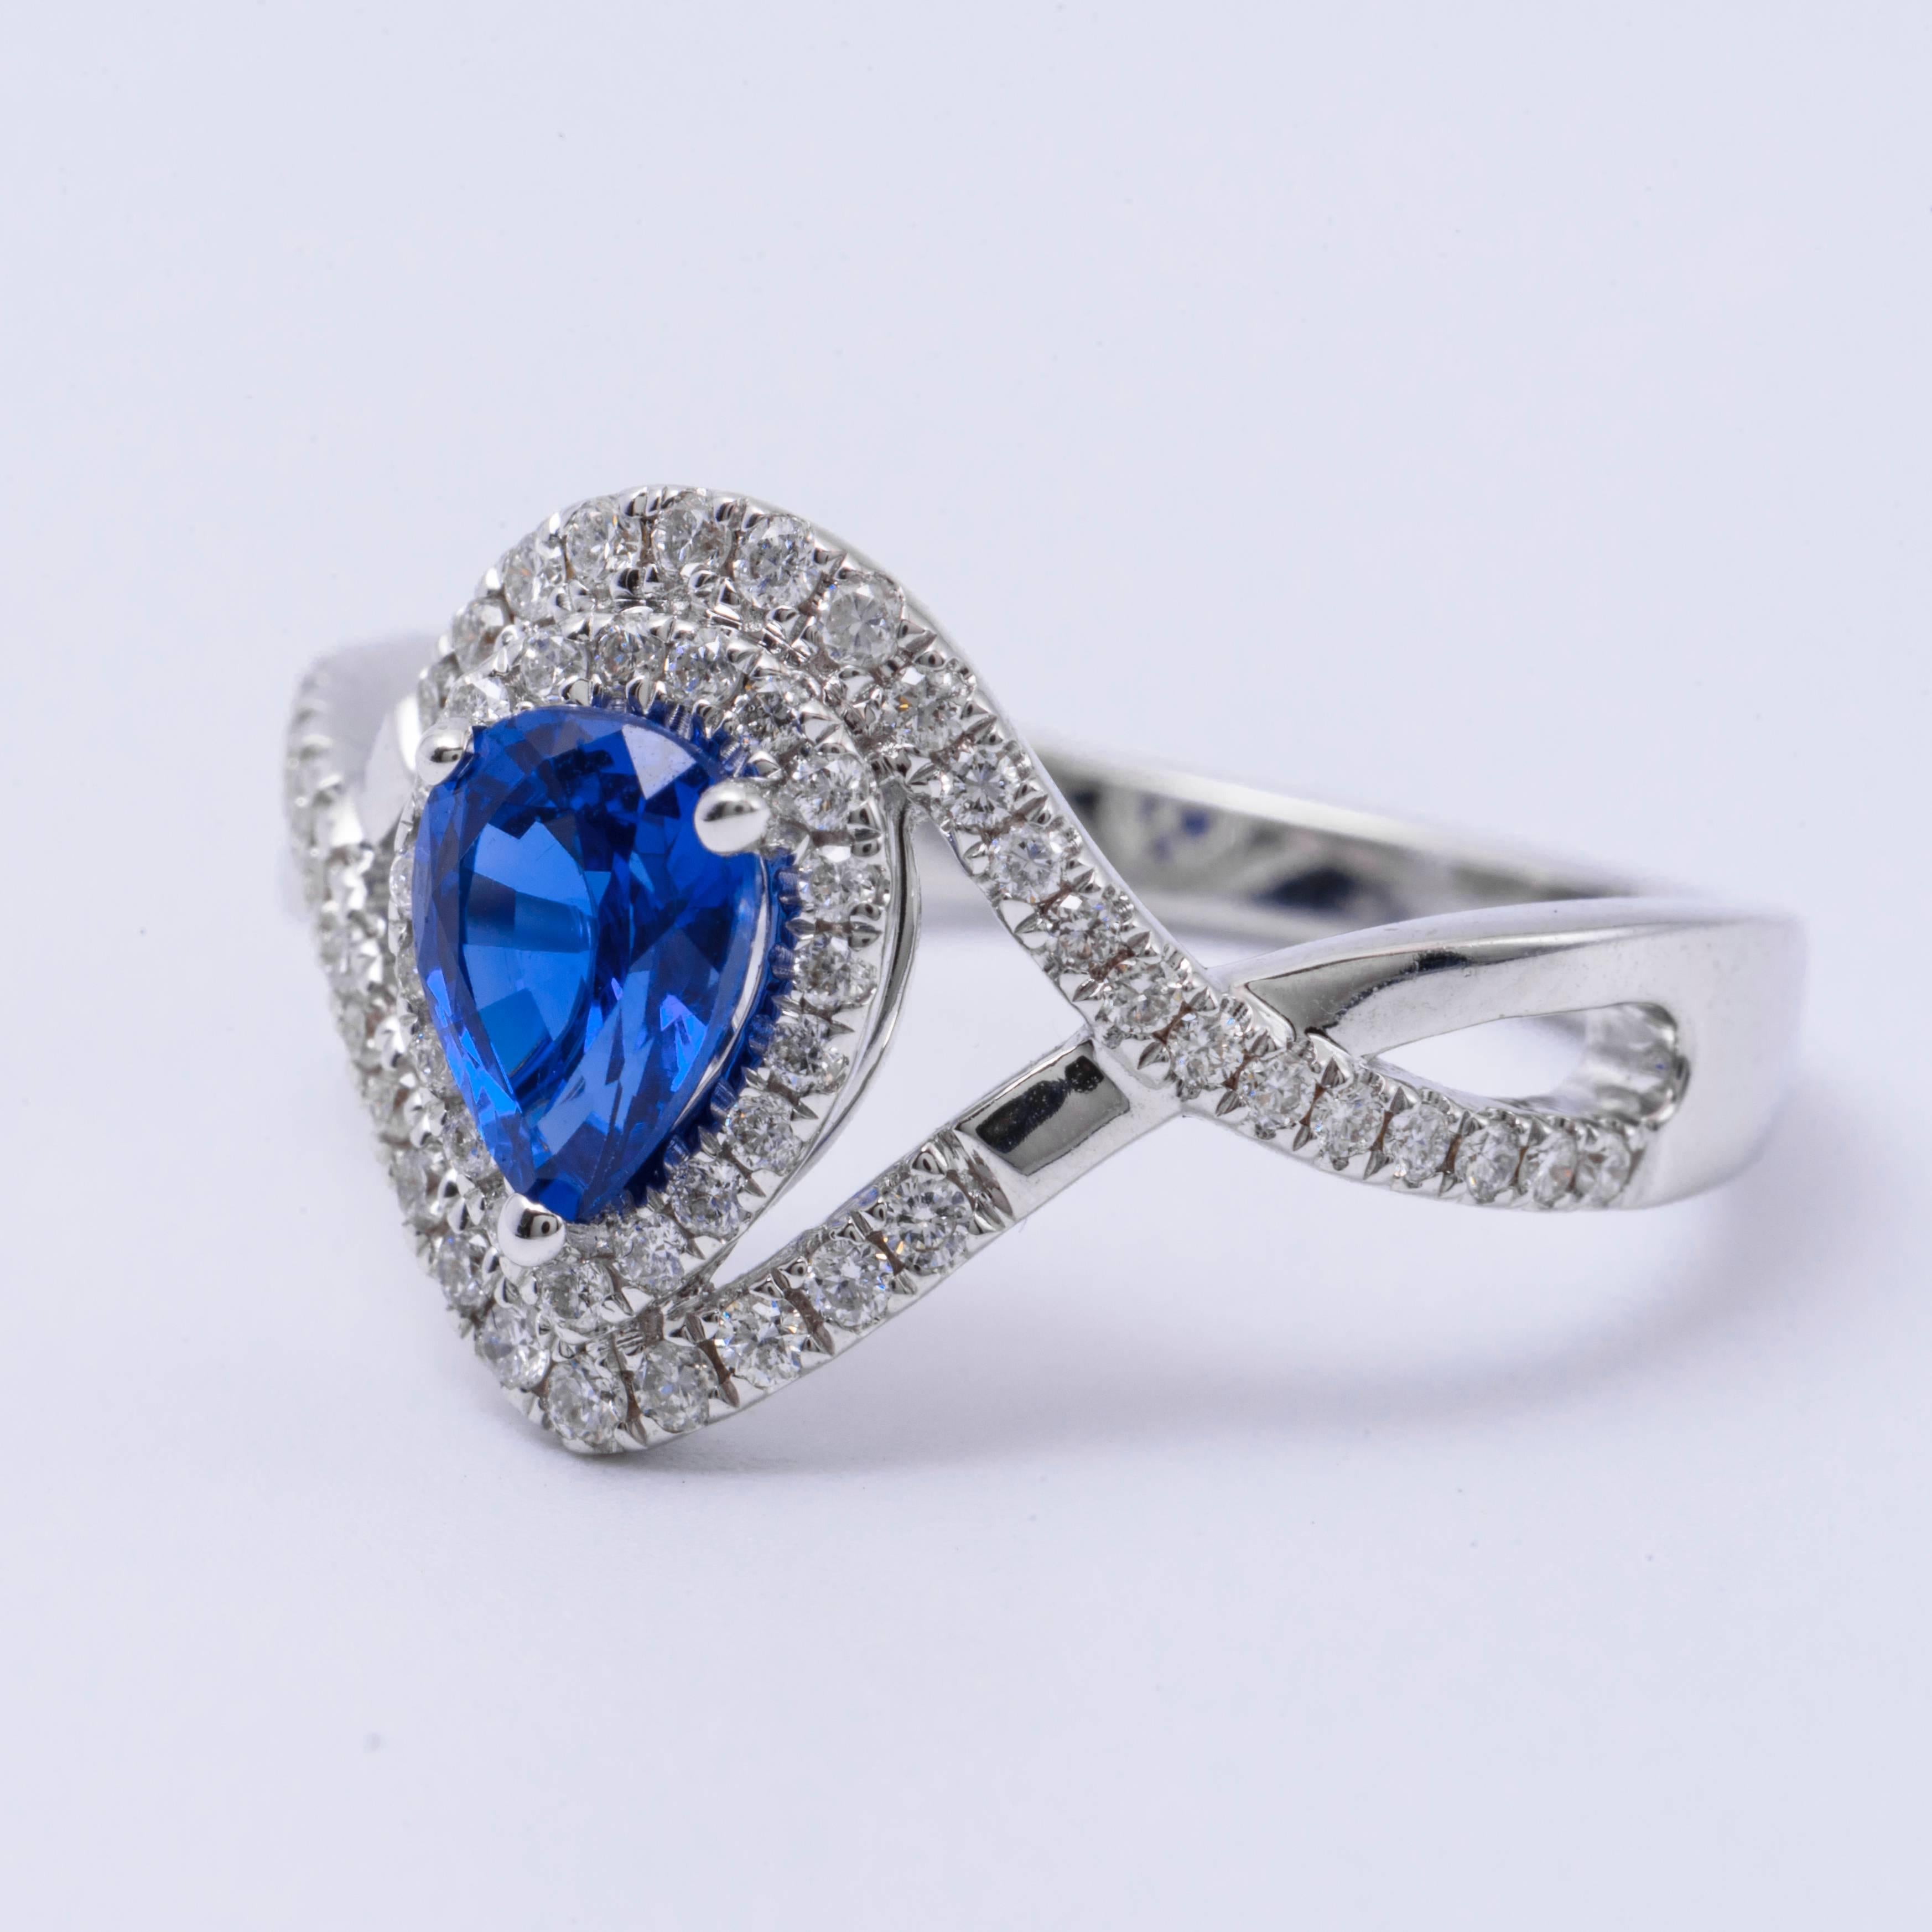 Contemporary Pear Shape Sapphire Diamond White Gold Engagement Cocktail Ring